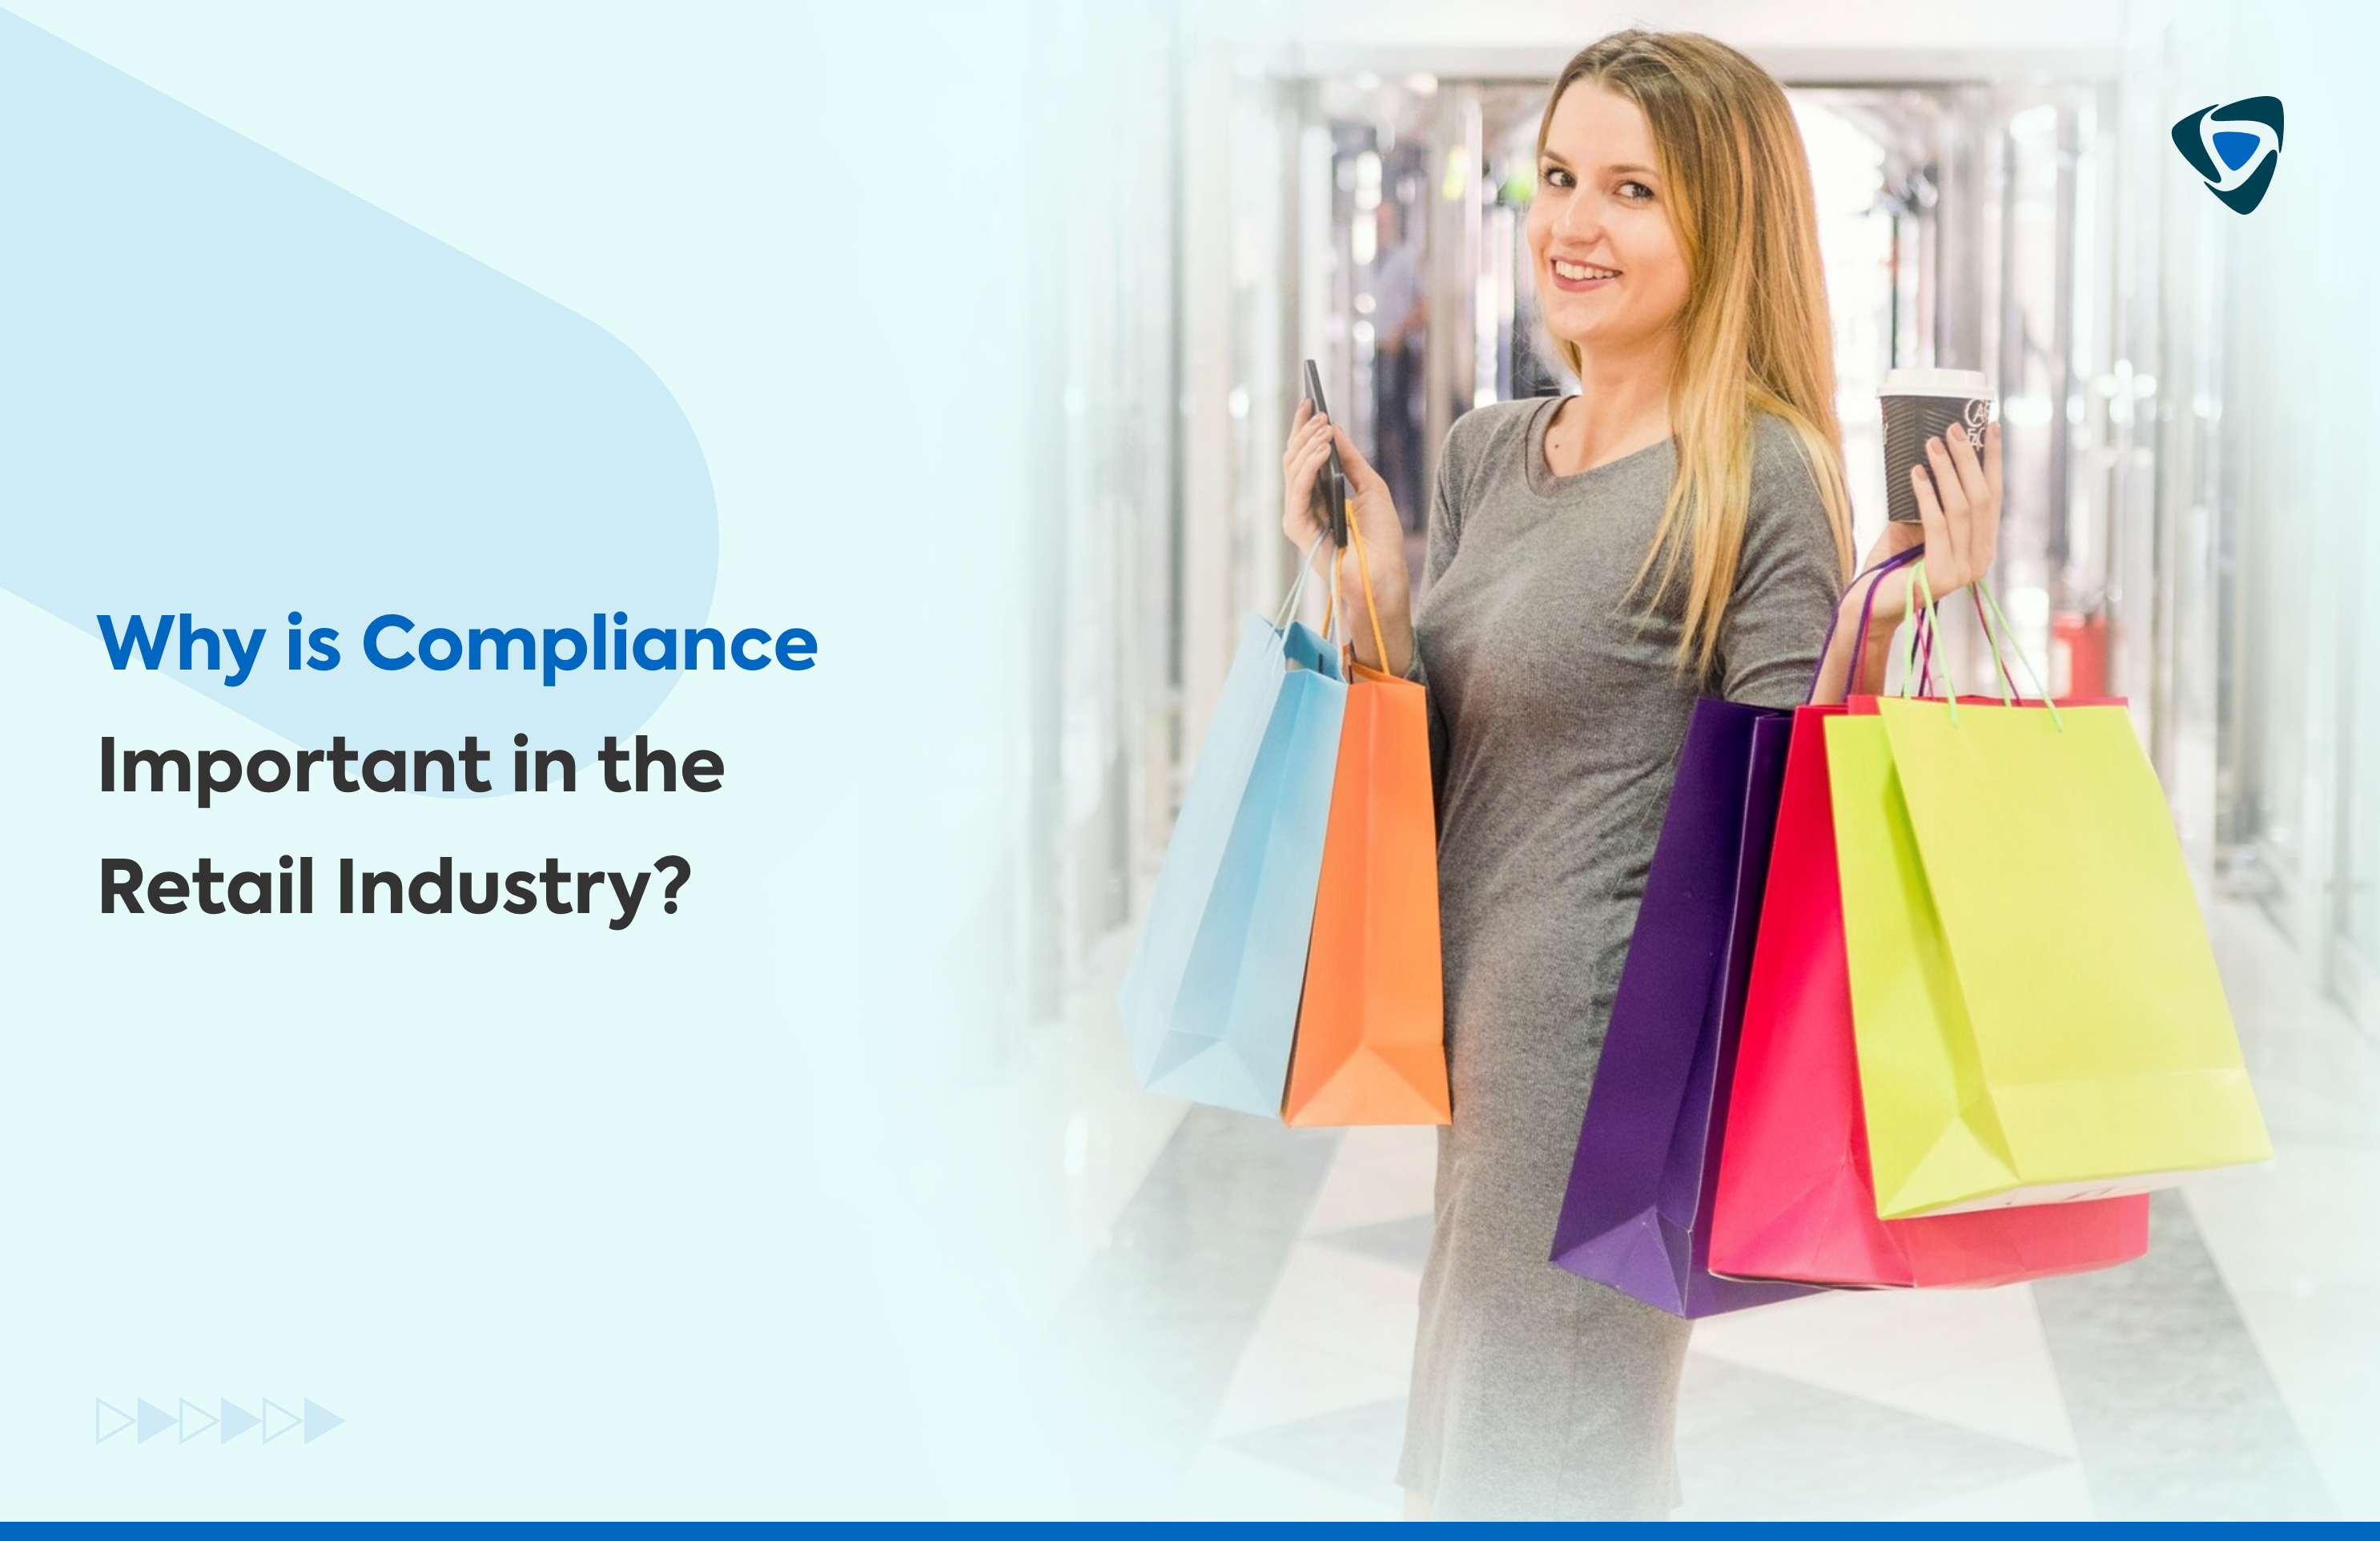 Why is Compliance Important in the Retail Industry